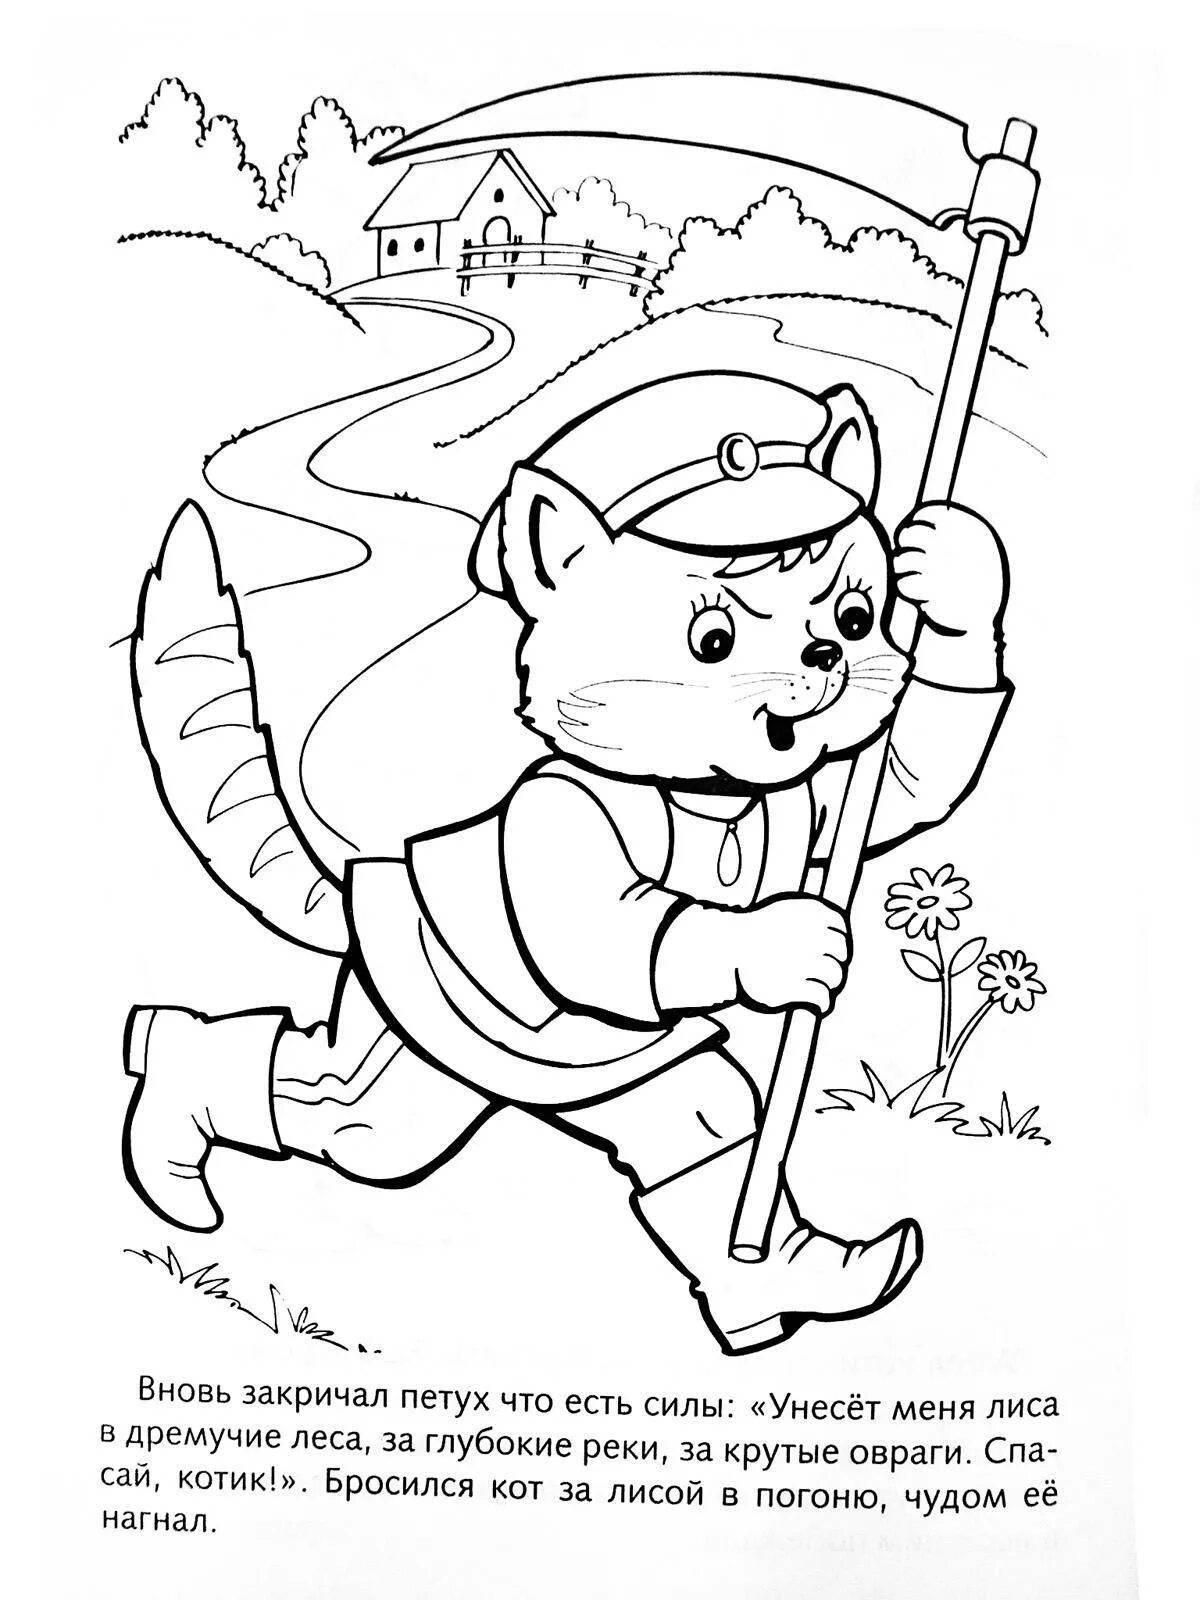 Colorful zhigarka coloring book for children